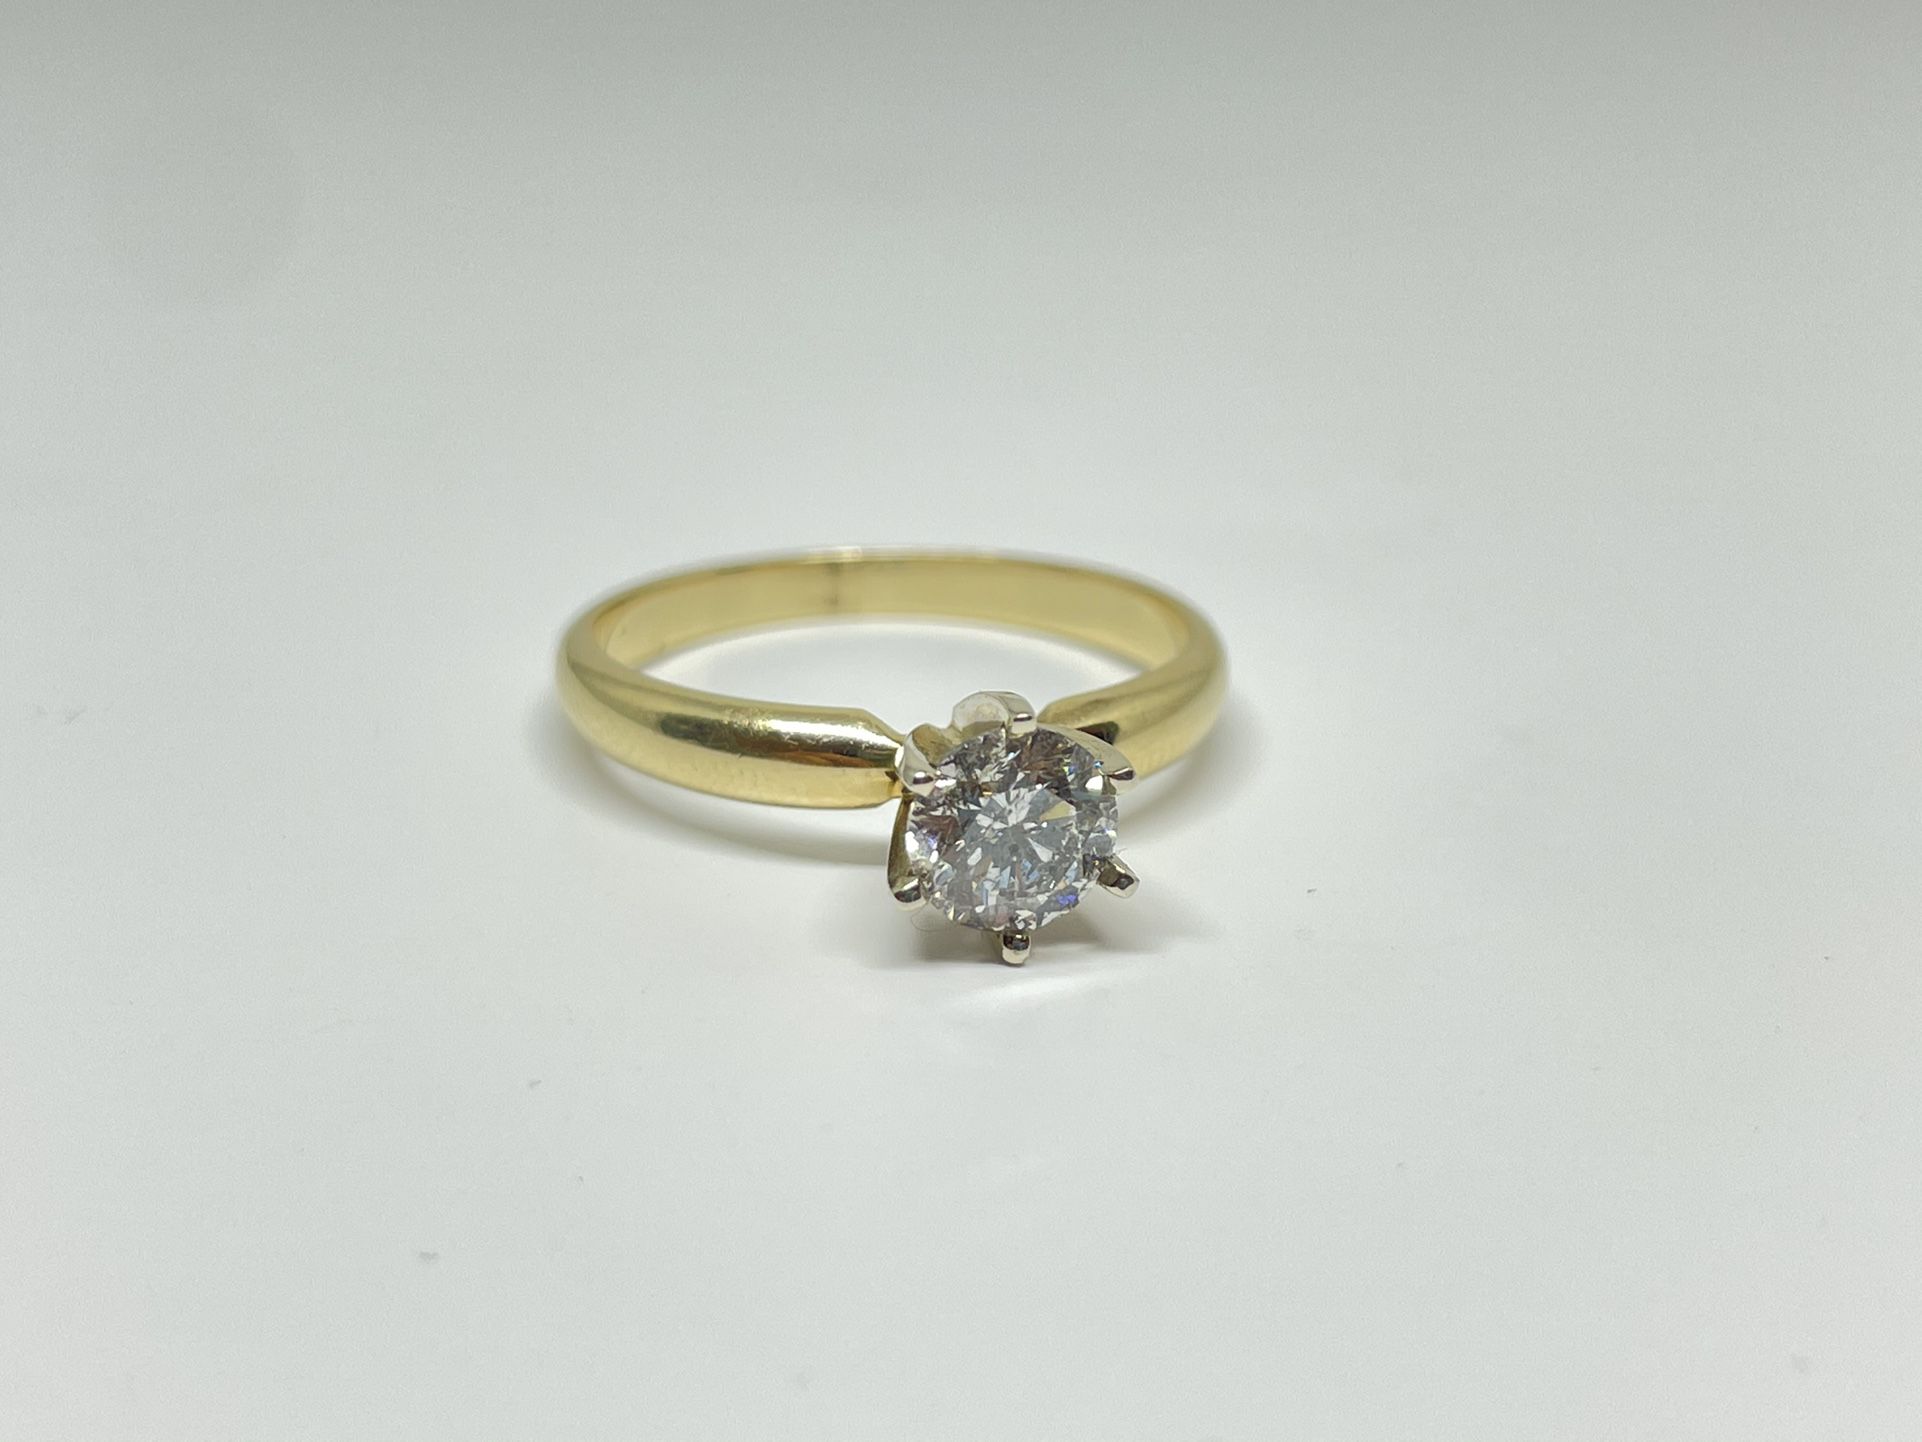 14k Yellow Gold Solitaire Ring w/ over 1/2 carat diamond